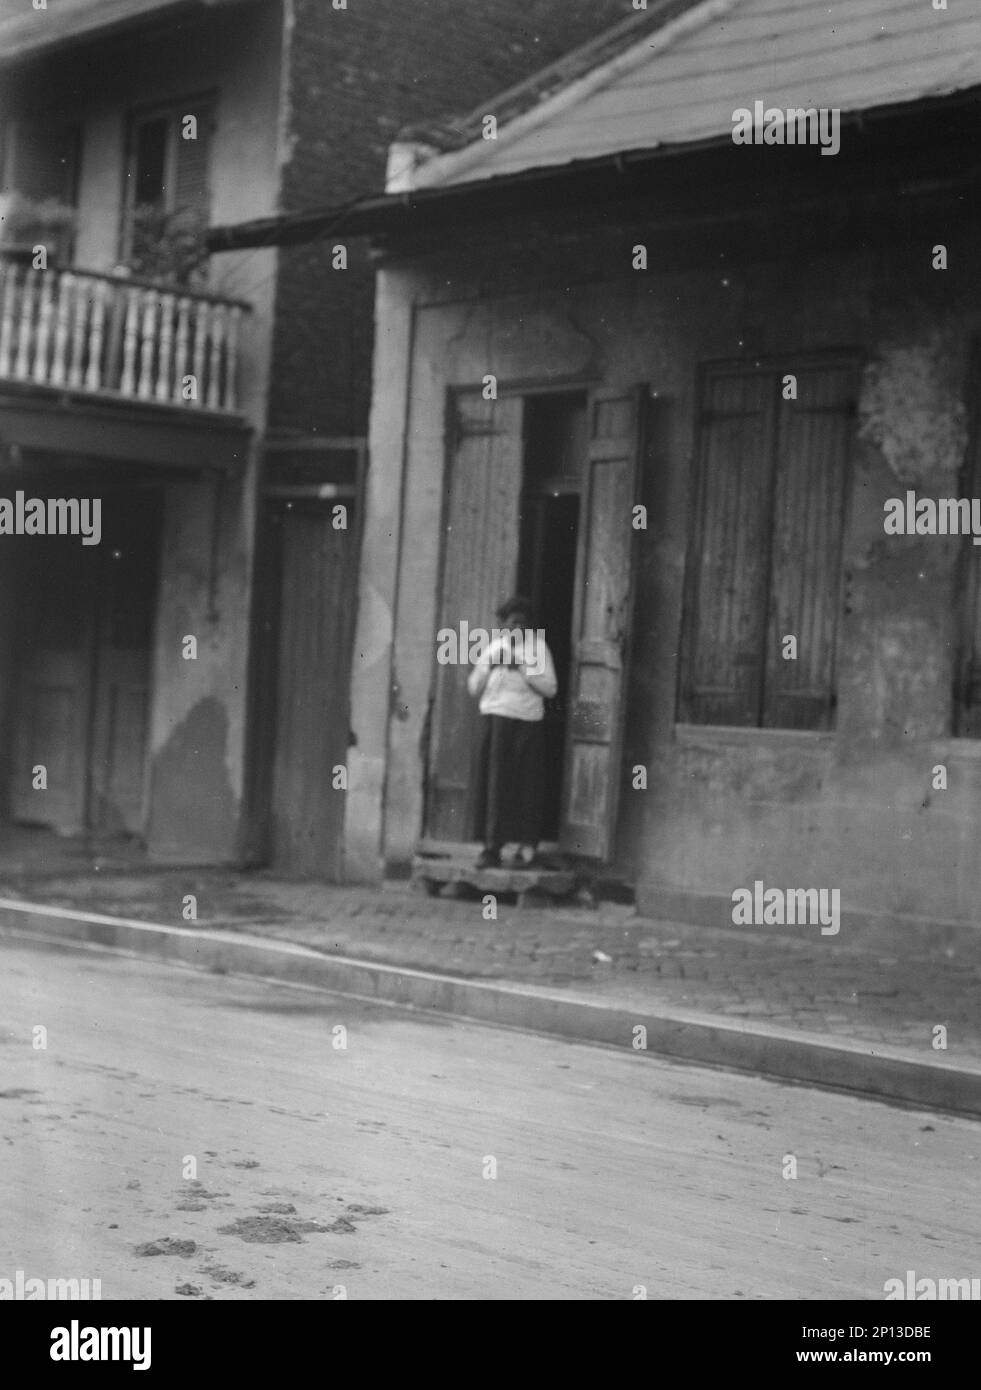 View from across street of a woman standing in a doorway in the French Quarter, New Orleans, between 1920 and 1926. Stock Photo